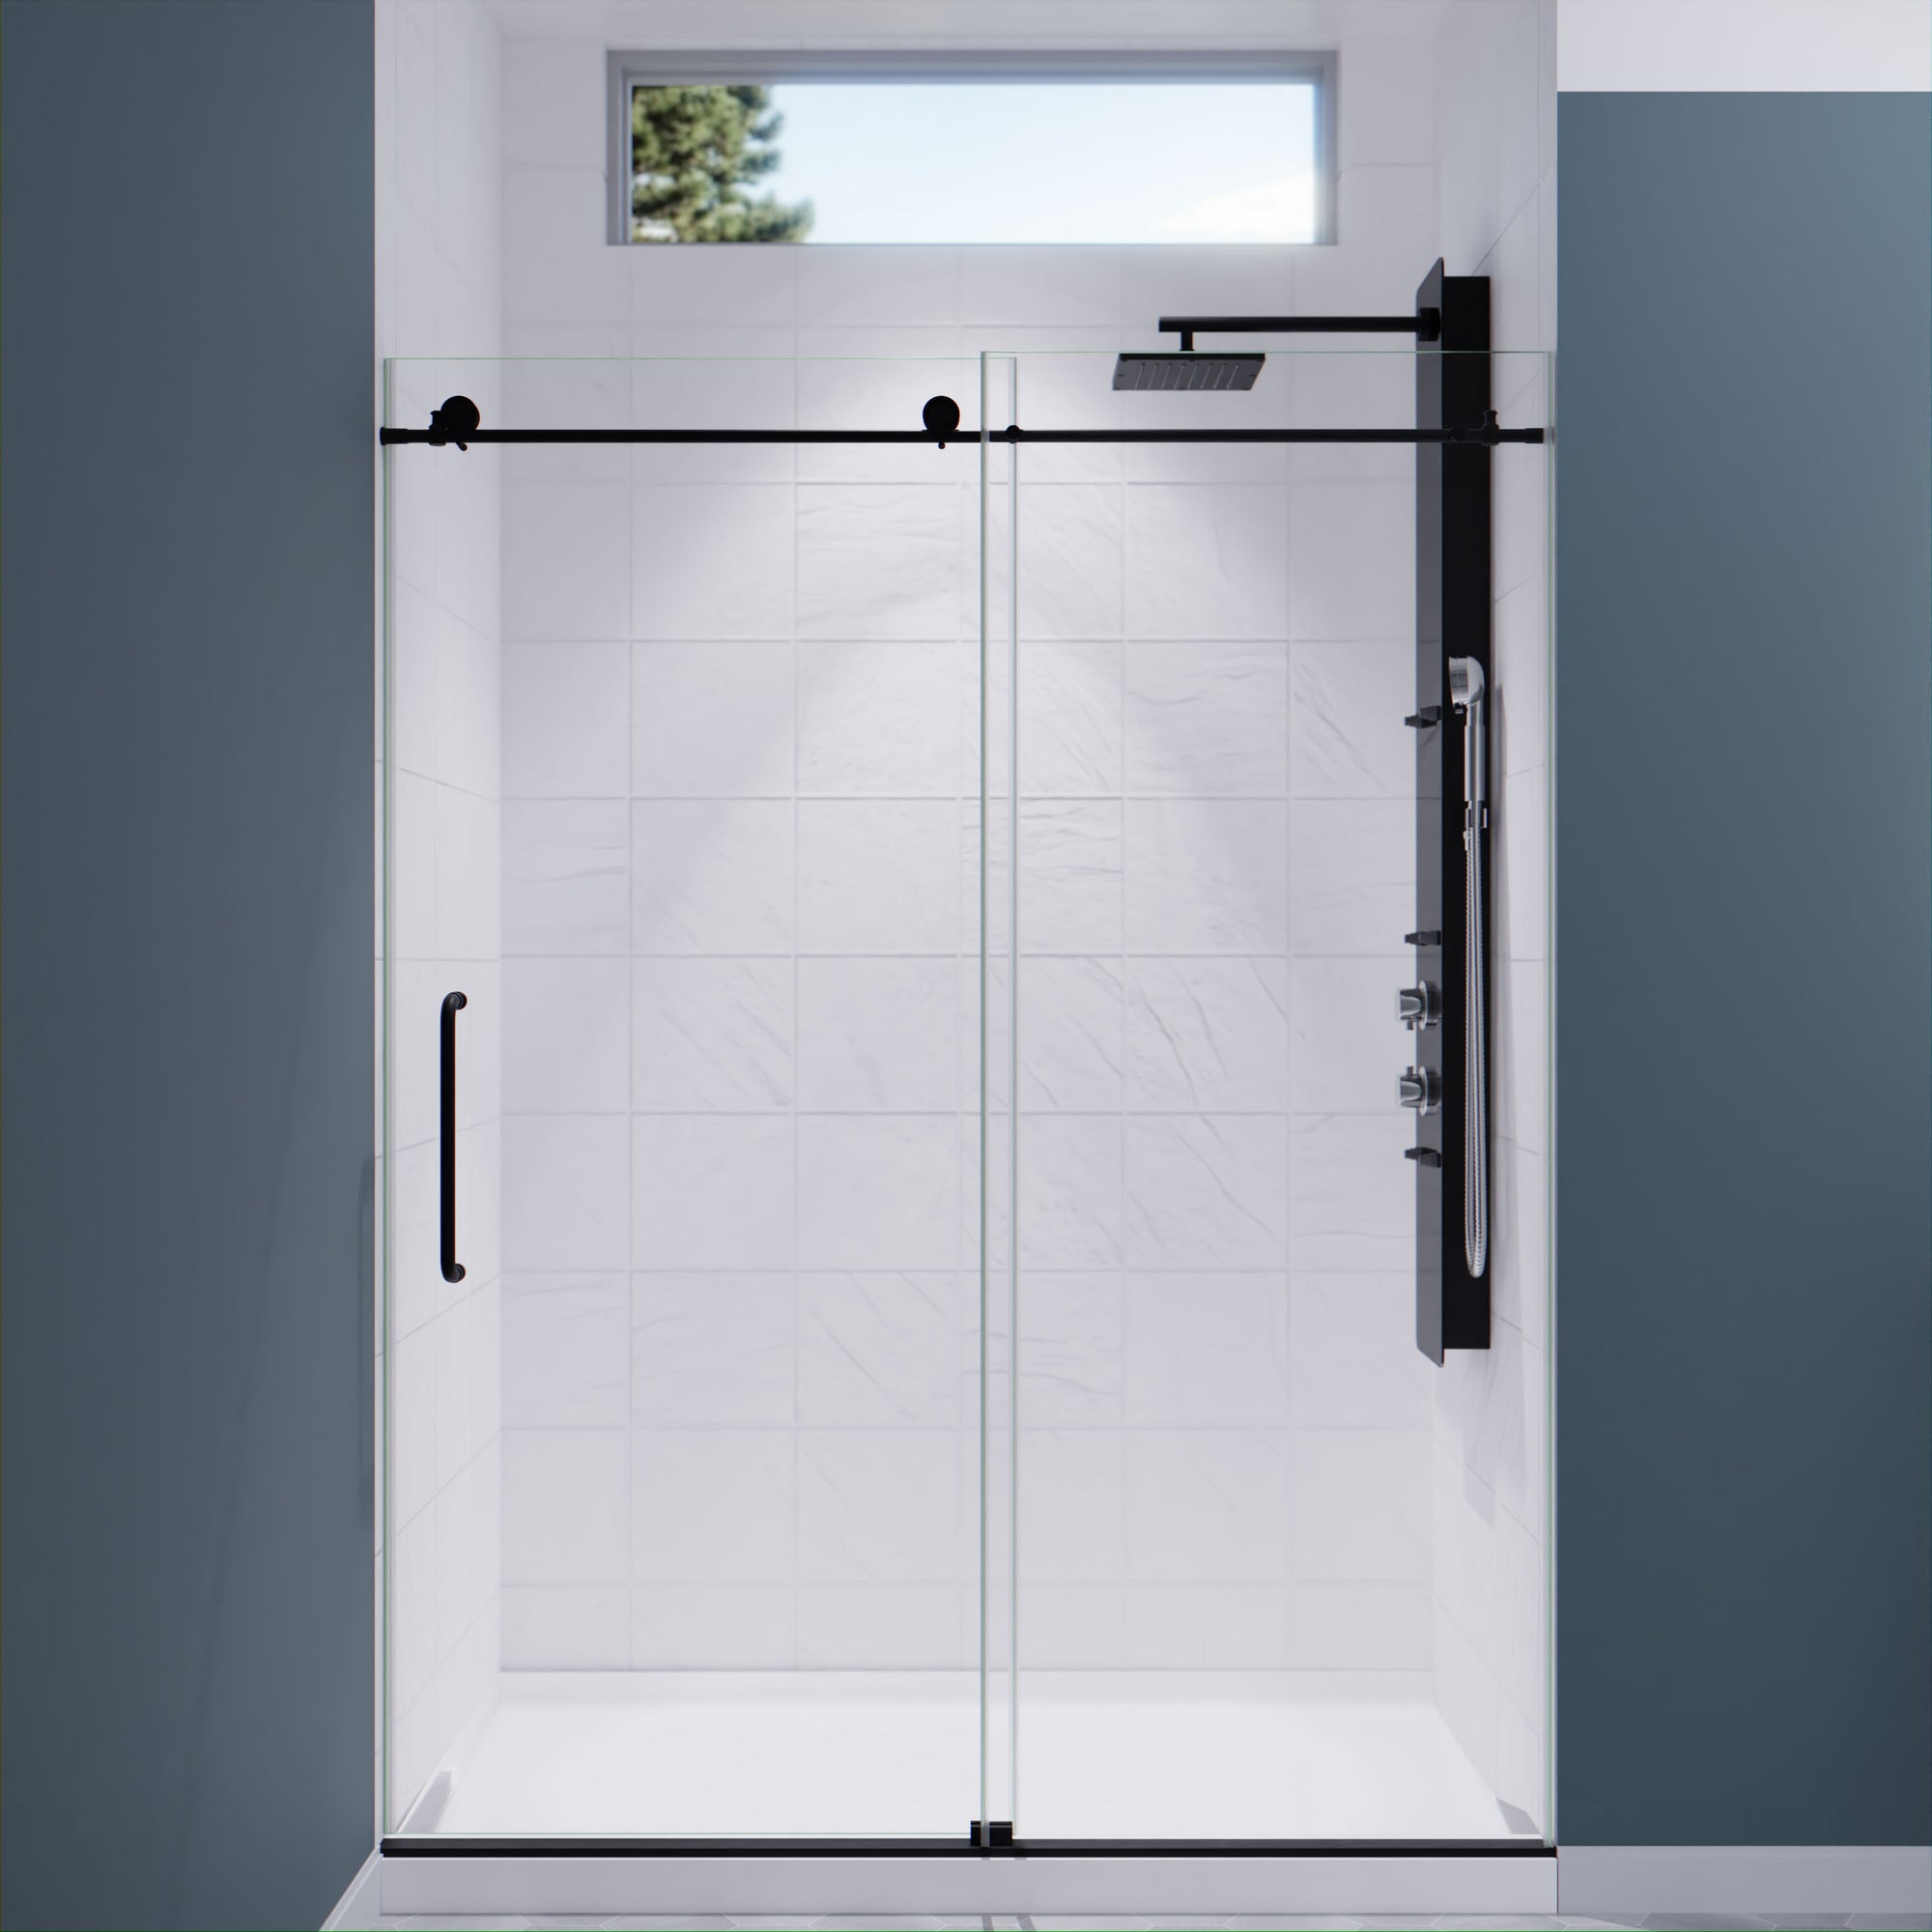 Anzzi Madam Series 60 in. by 76 in. Frameless Sliding Shower Door with Handle SD-AZ13-02